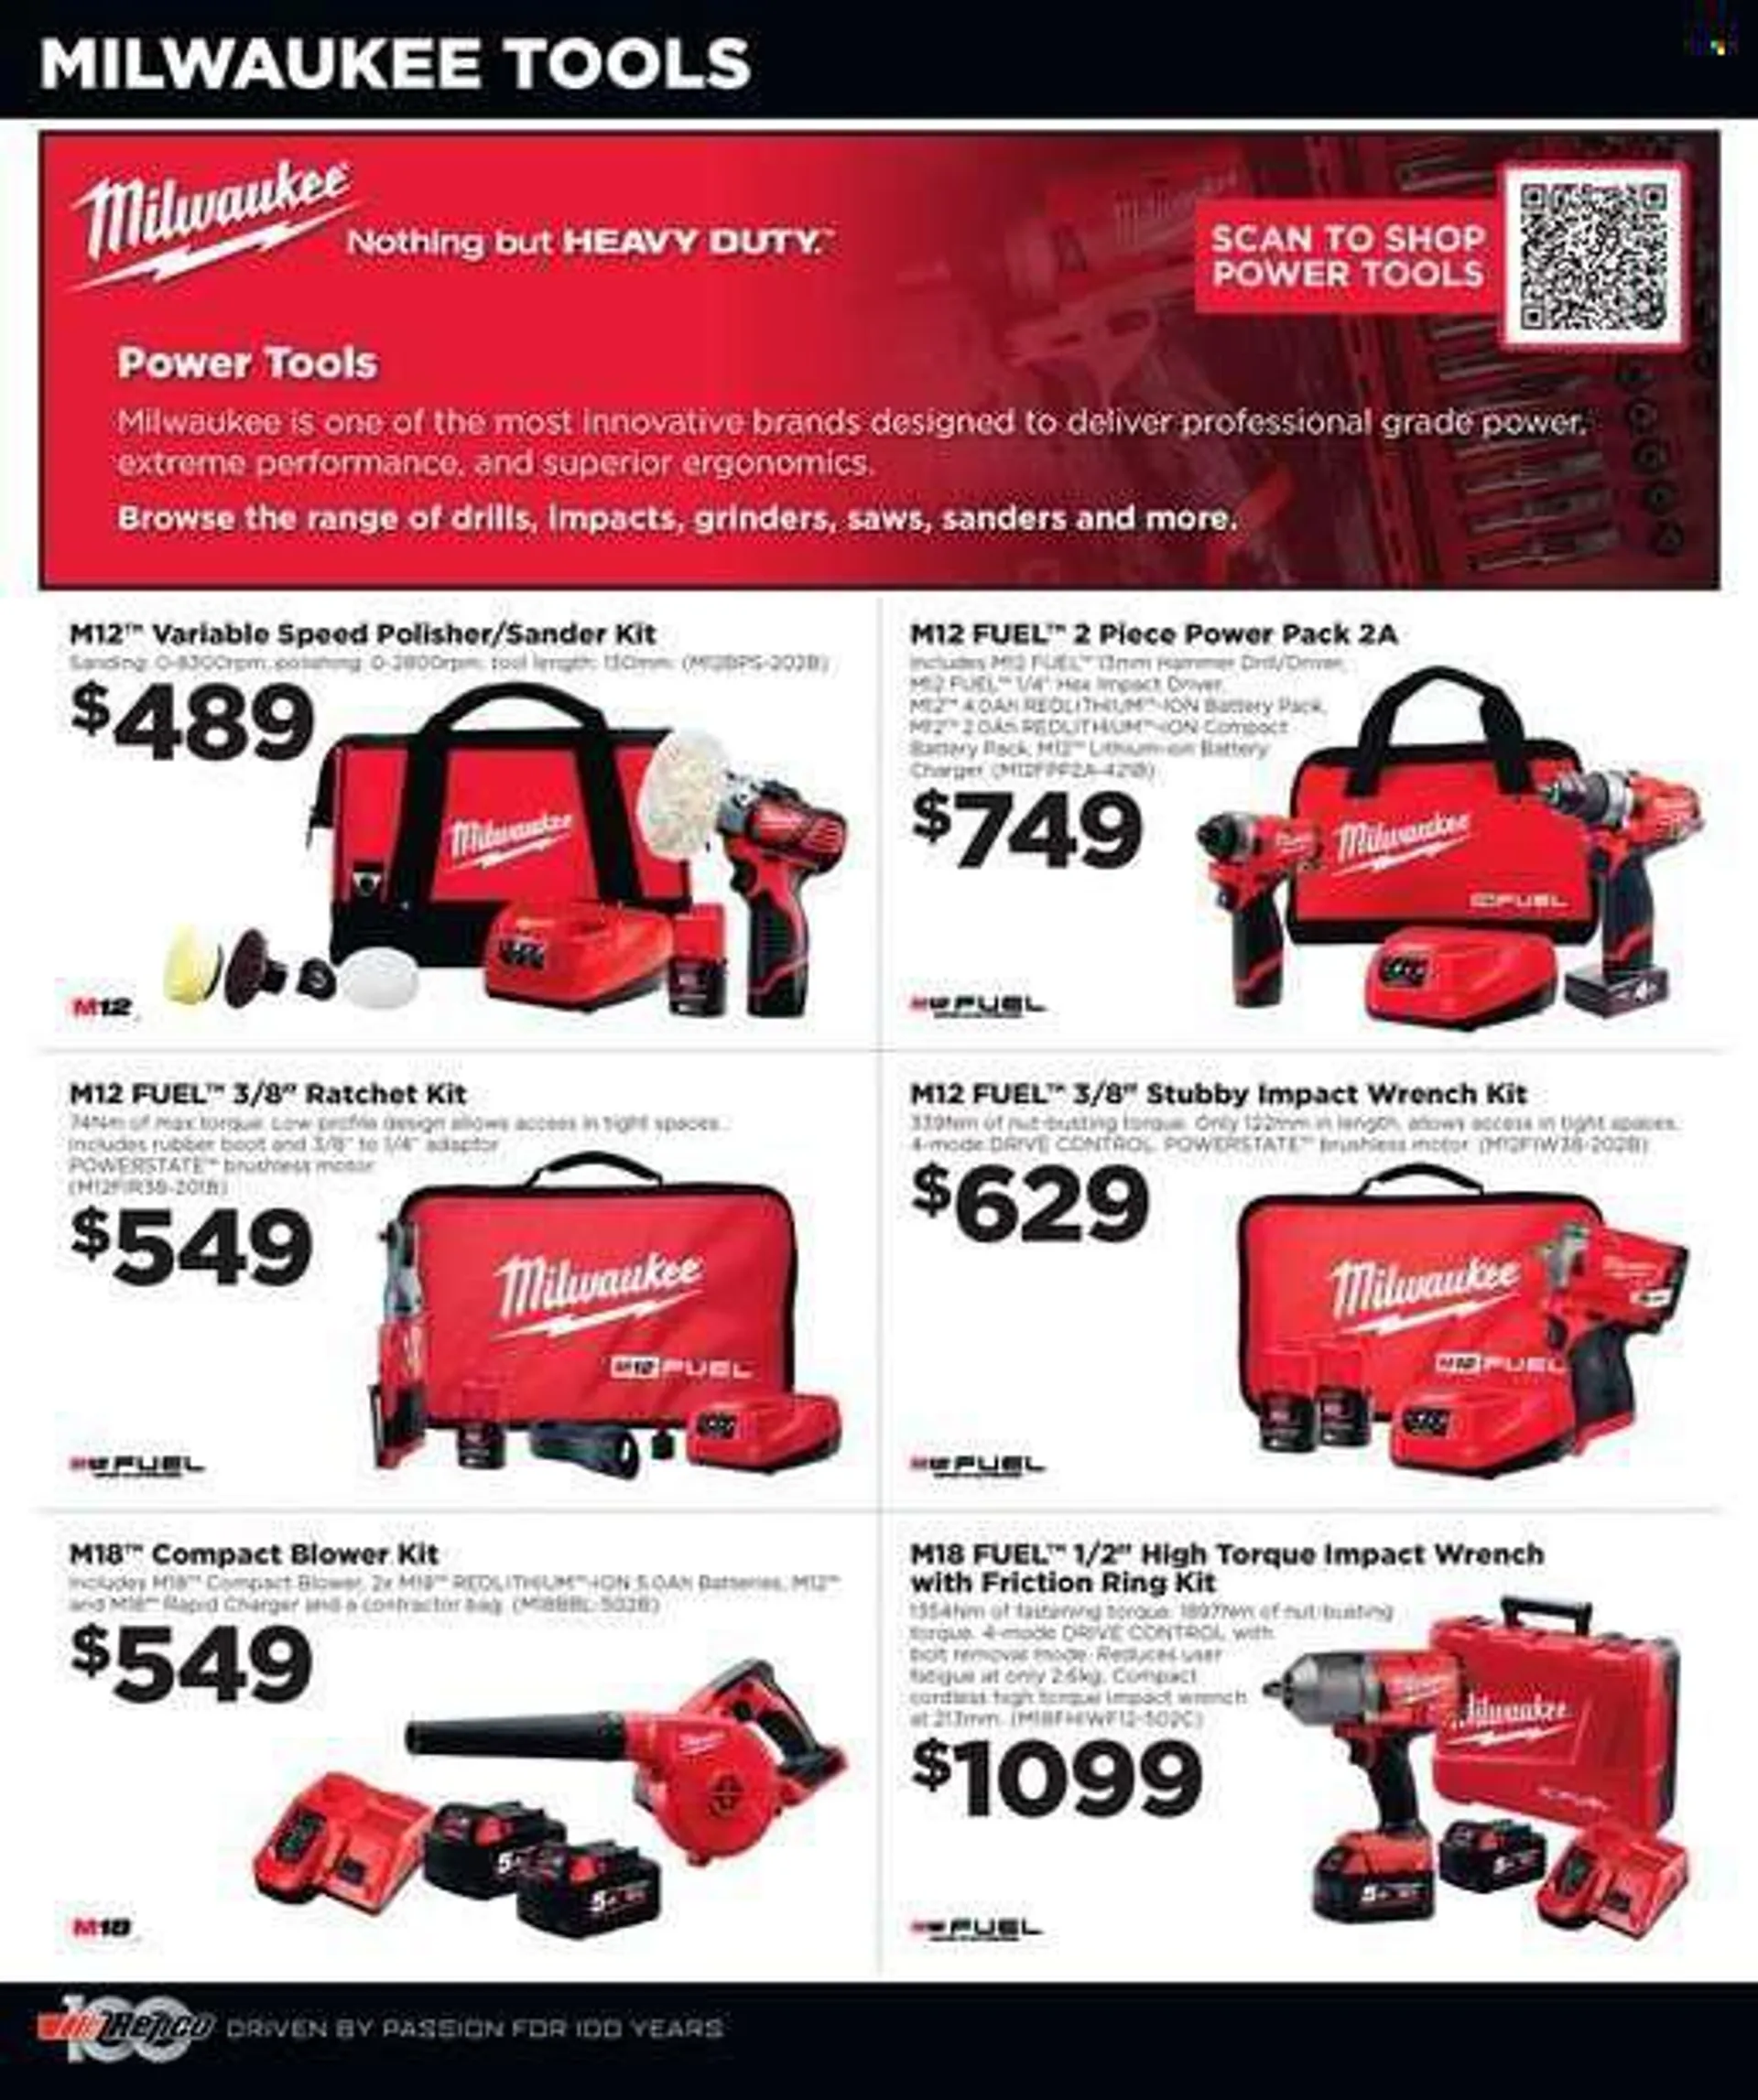 Repco mailer - 01.06.2022 - 14.06.2022. - 1 June 14 June 2022 - Page 2